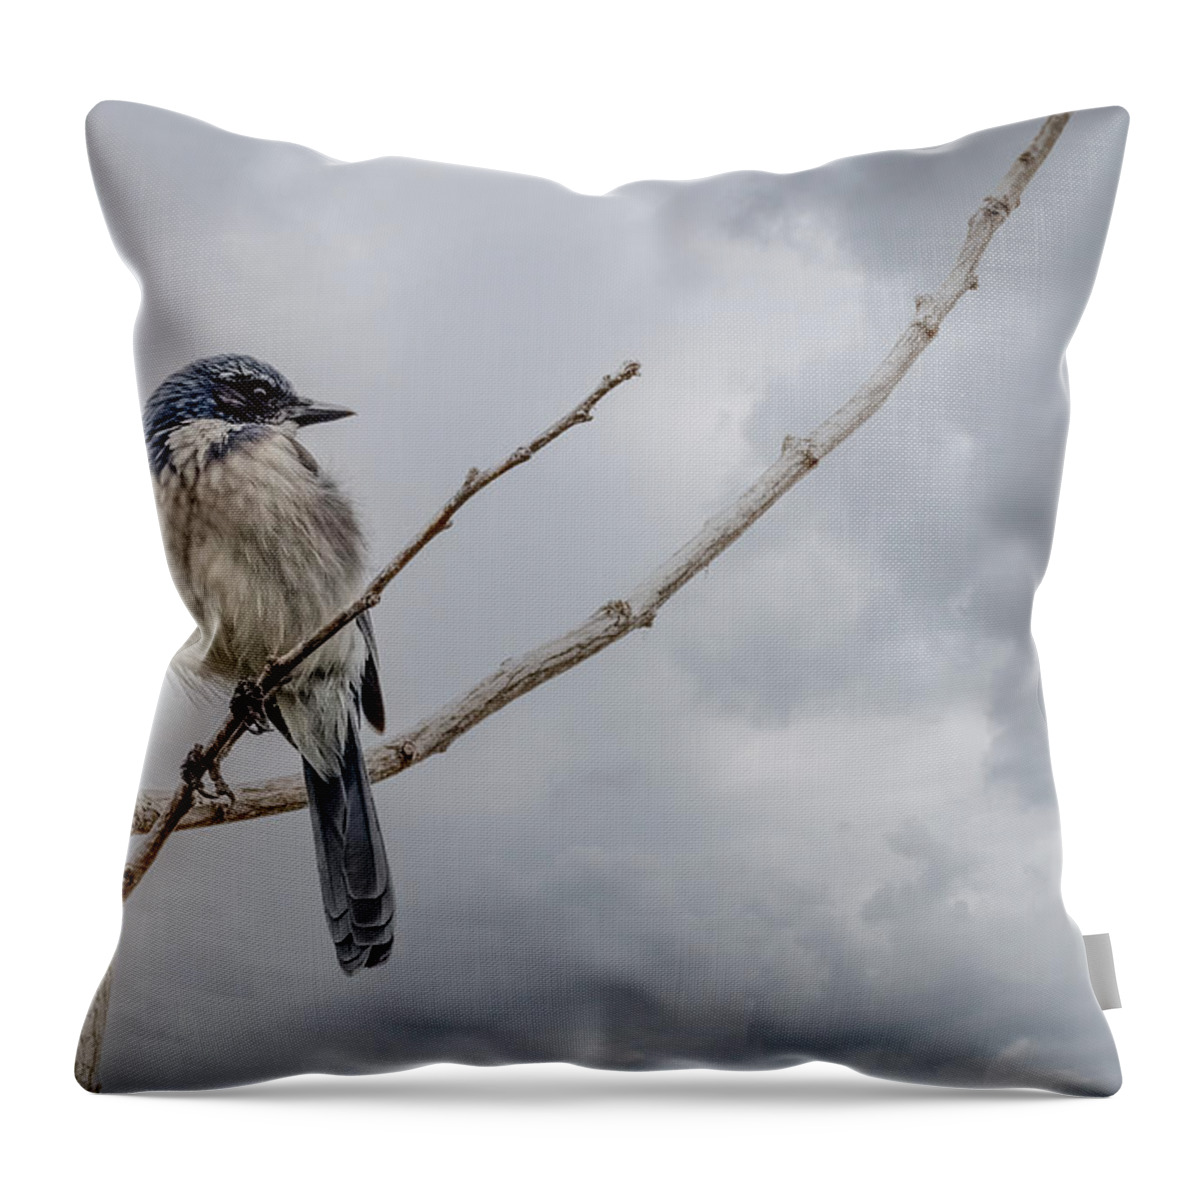 Jay Throw Pillow featuring the photograph Scrub Jay by Jerry Cahill